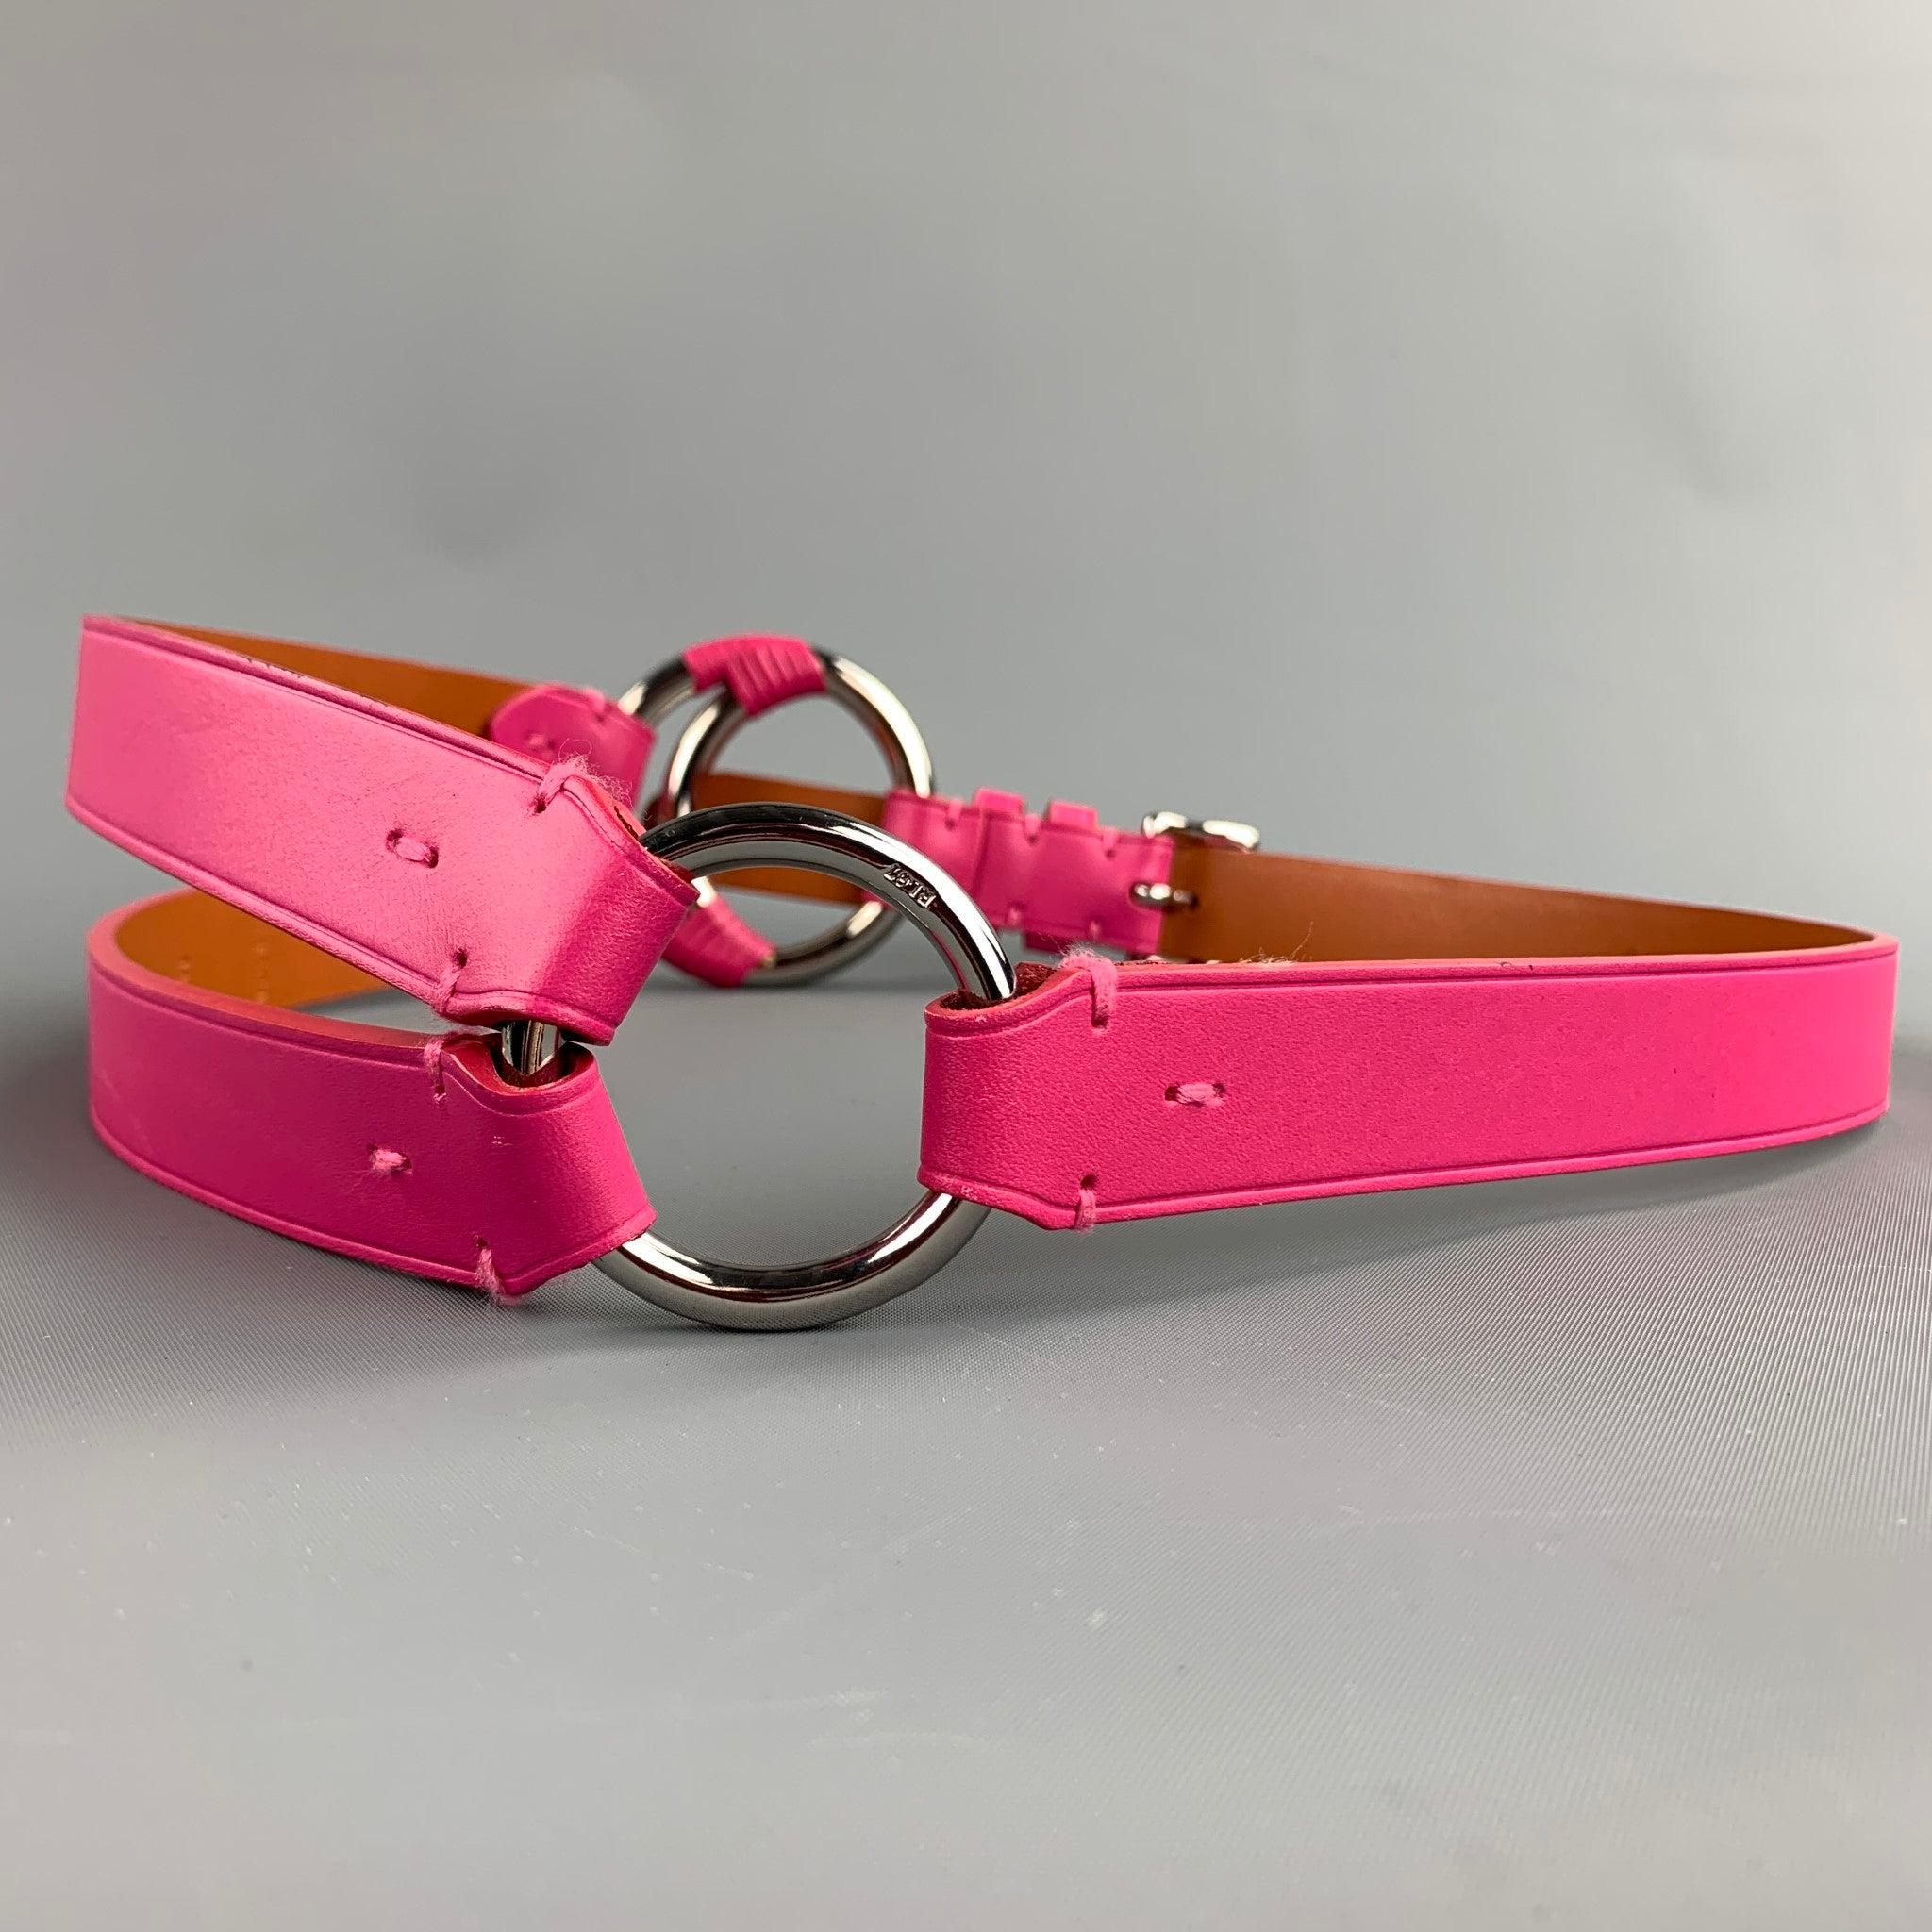 RALPH LAUREN Waist Size M Pink Leather Belt In Good Condition For Sale In San Francisco, CA